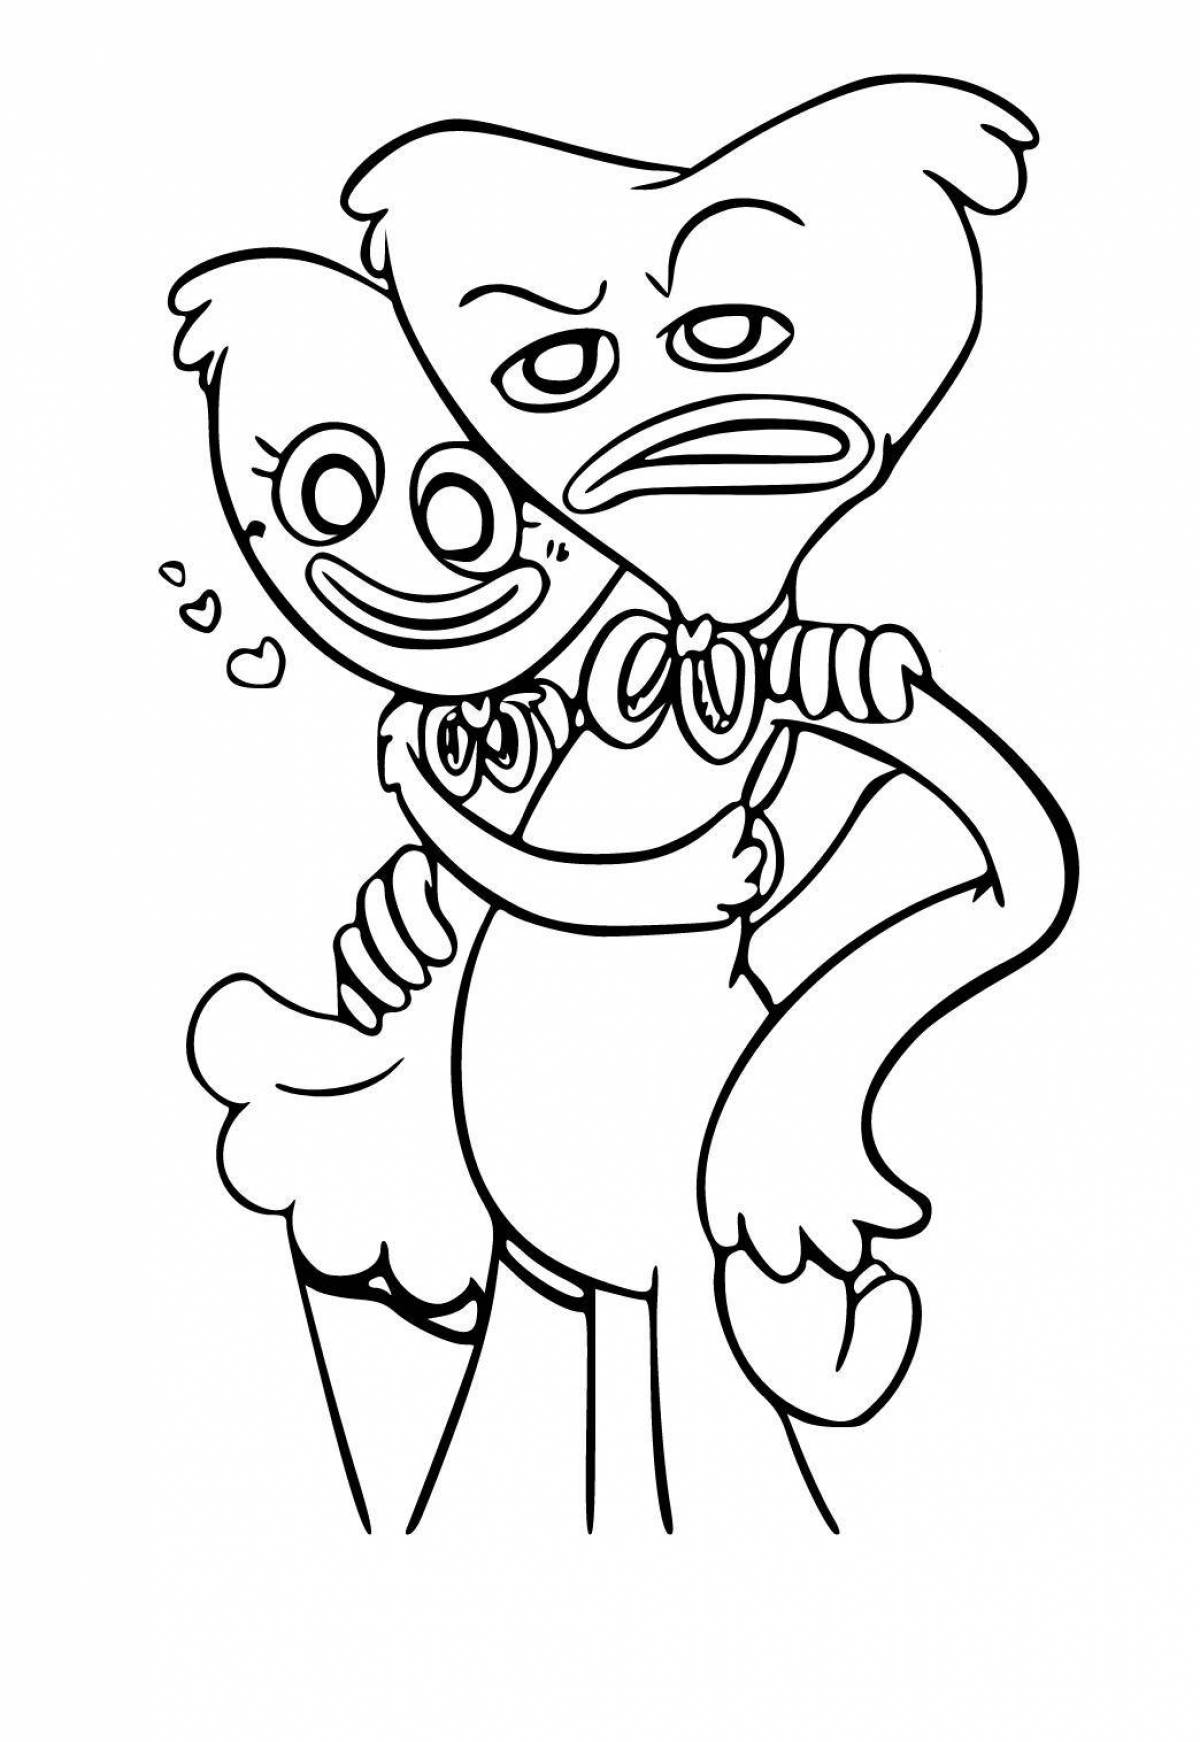 Violent haggy waggie coloring page